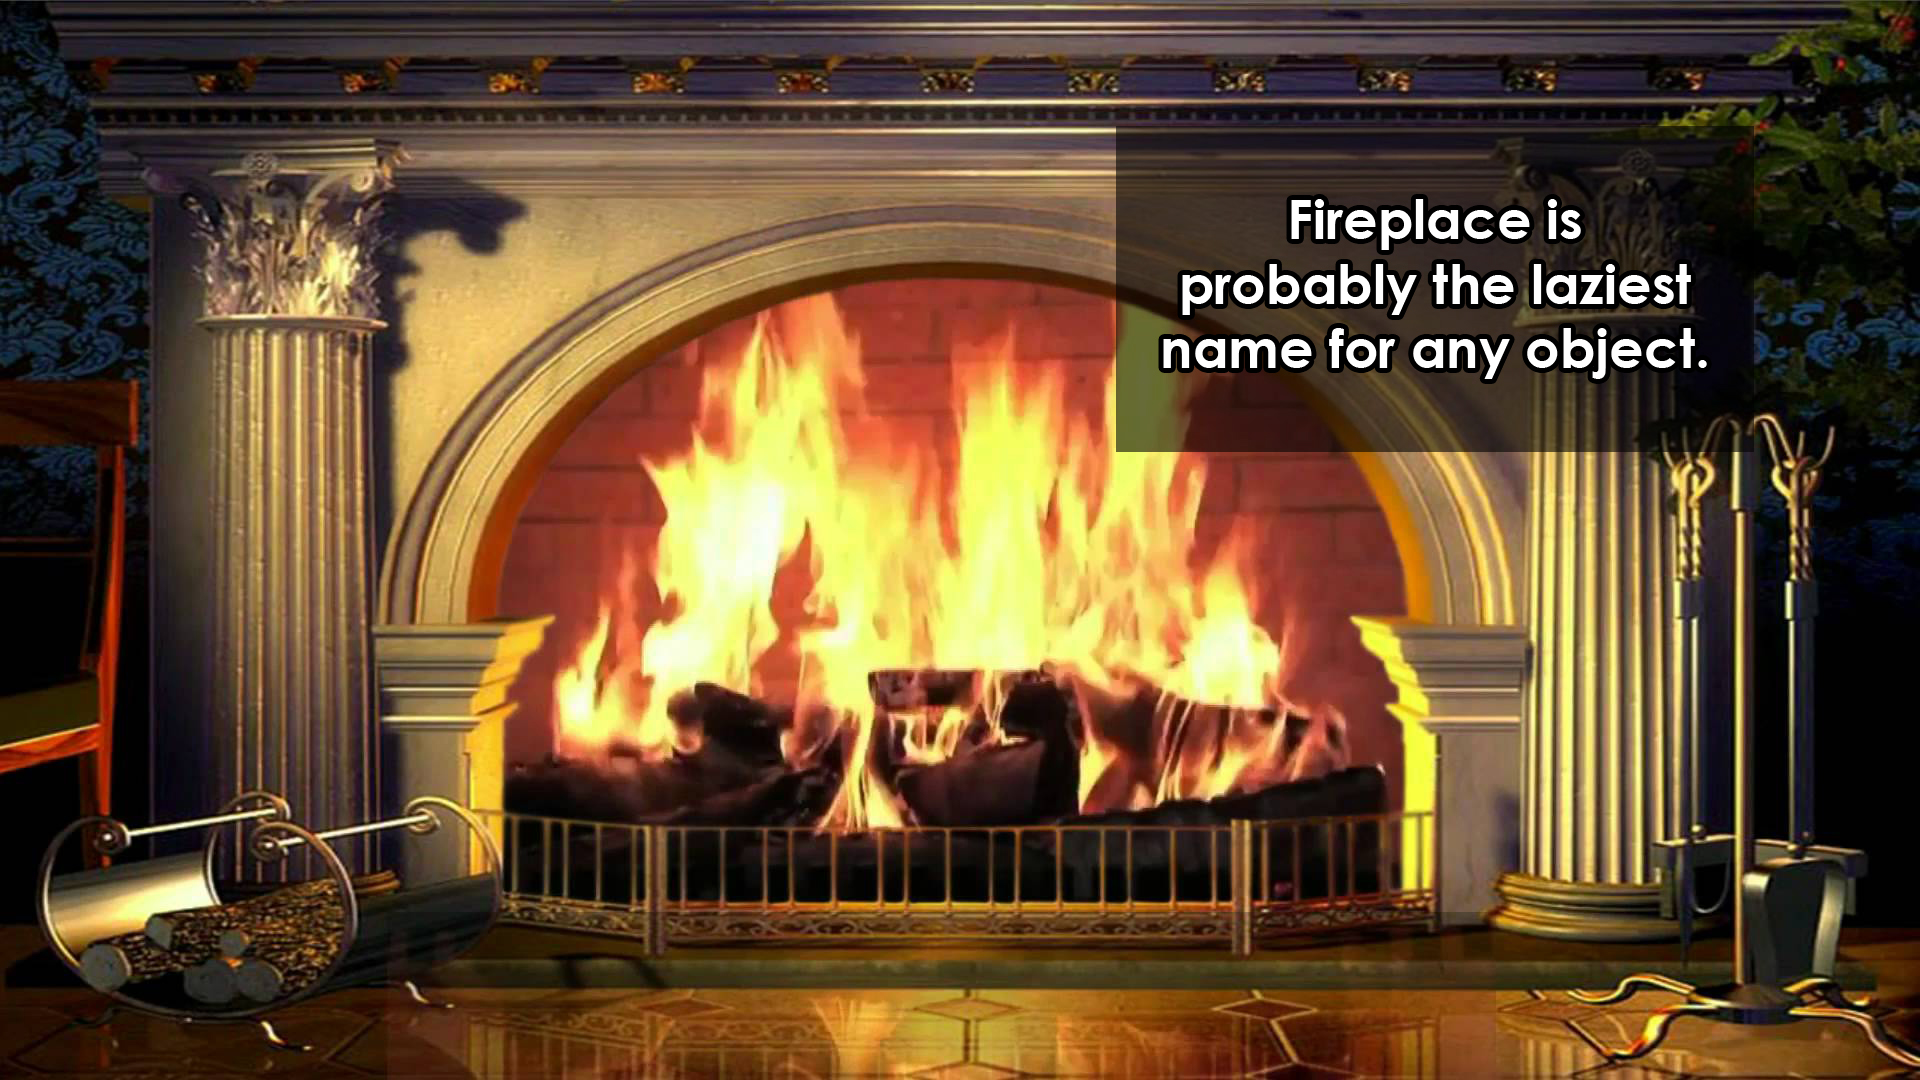 fireplace wallpaper hd - Fireplace is probably the laziest name for any object.